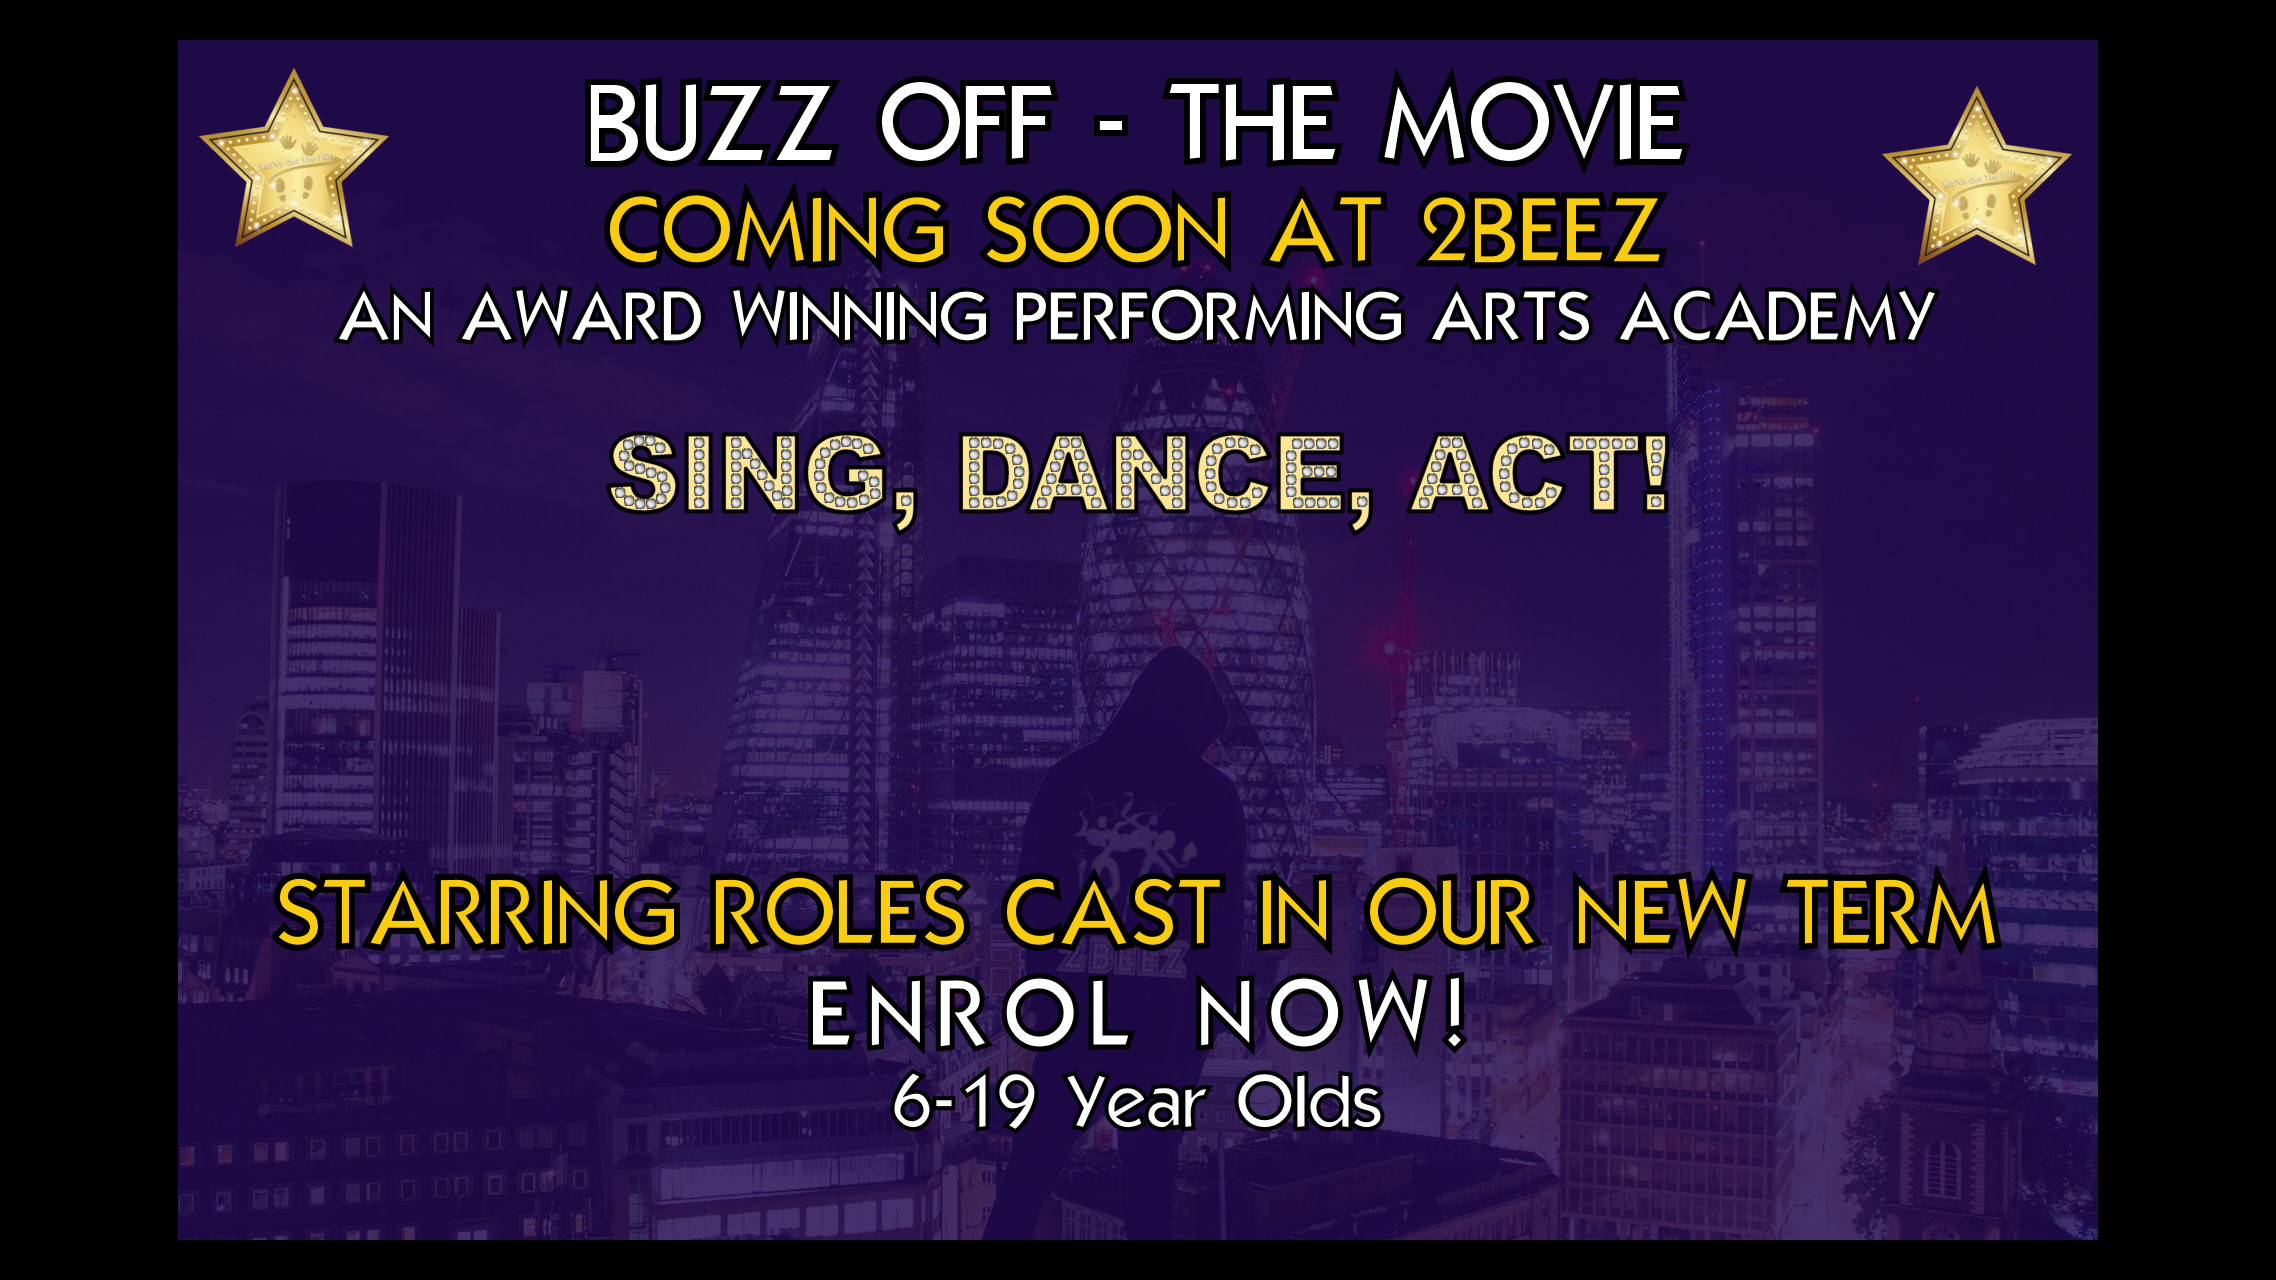 An image advertising 2BEEZ original production of Buzz Off - The Movie